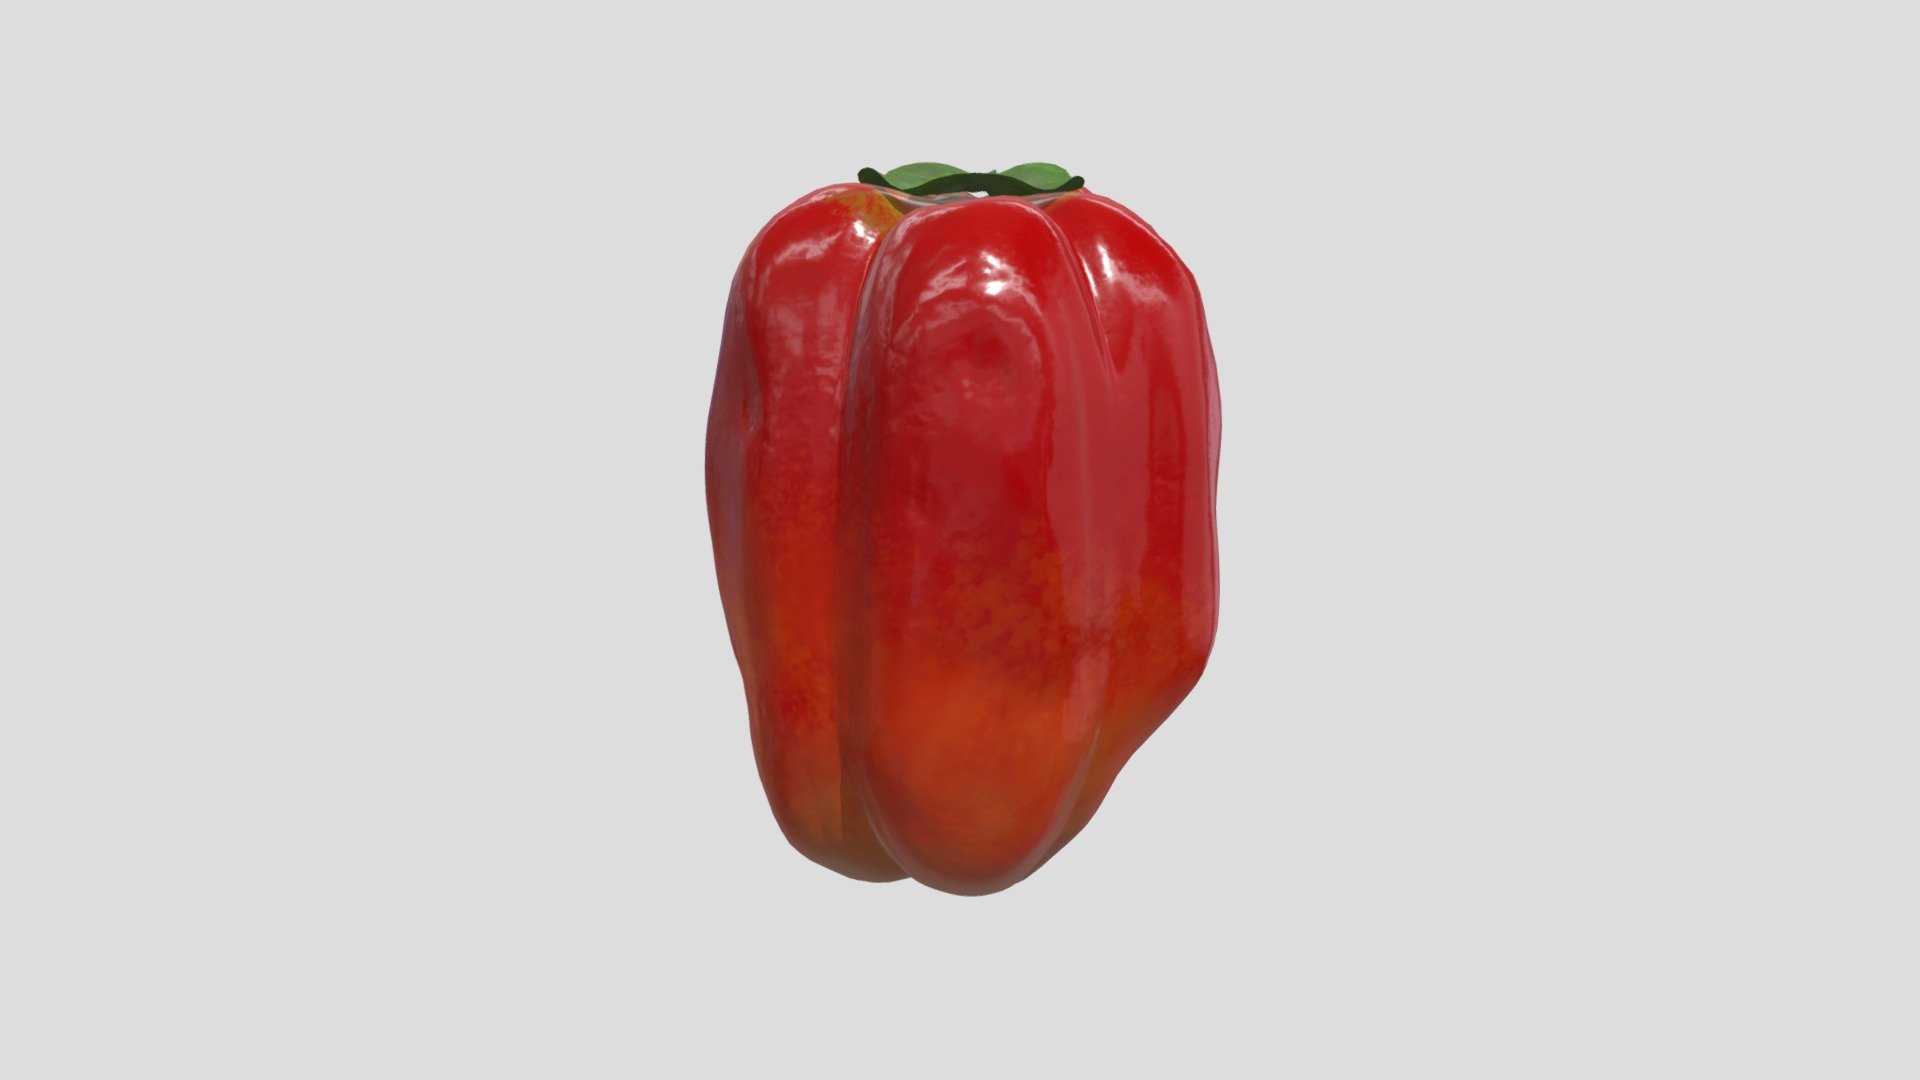 3d model of a Pepper. Perfect for games, scenes or renders.

Model is correctly divided into main parts. All main parts are presented as separate parts therefore materials of objects are easy to be modified or removed and standard parts are easy to be replaced.

TEXTURES: Models includes high textures with maps: Base Color (.png) Height (.png) Metallic (.png) Normal (.png) Roughness (.png)

FORMATS: .obj .dae .stl .blend .fbx .3ds

GENERAL: Easy editable. Model is fully textured.

Vertices: 7179 Polygons: 7152

All formats have been tested and work correctly.

Some files may need textures or materials adjusted or added depending on the program they are imported into 3d model